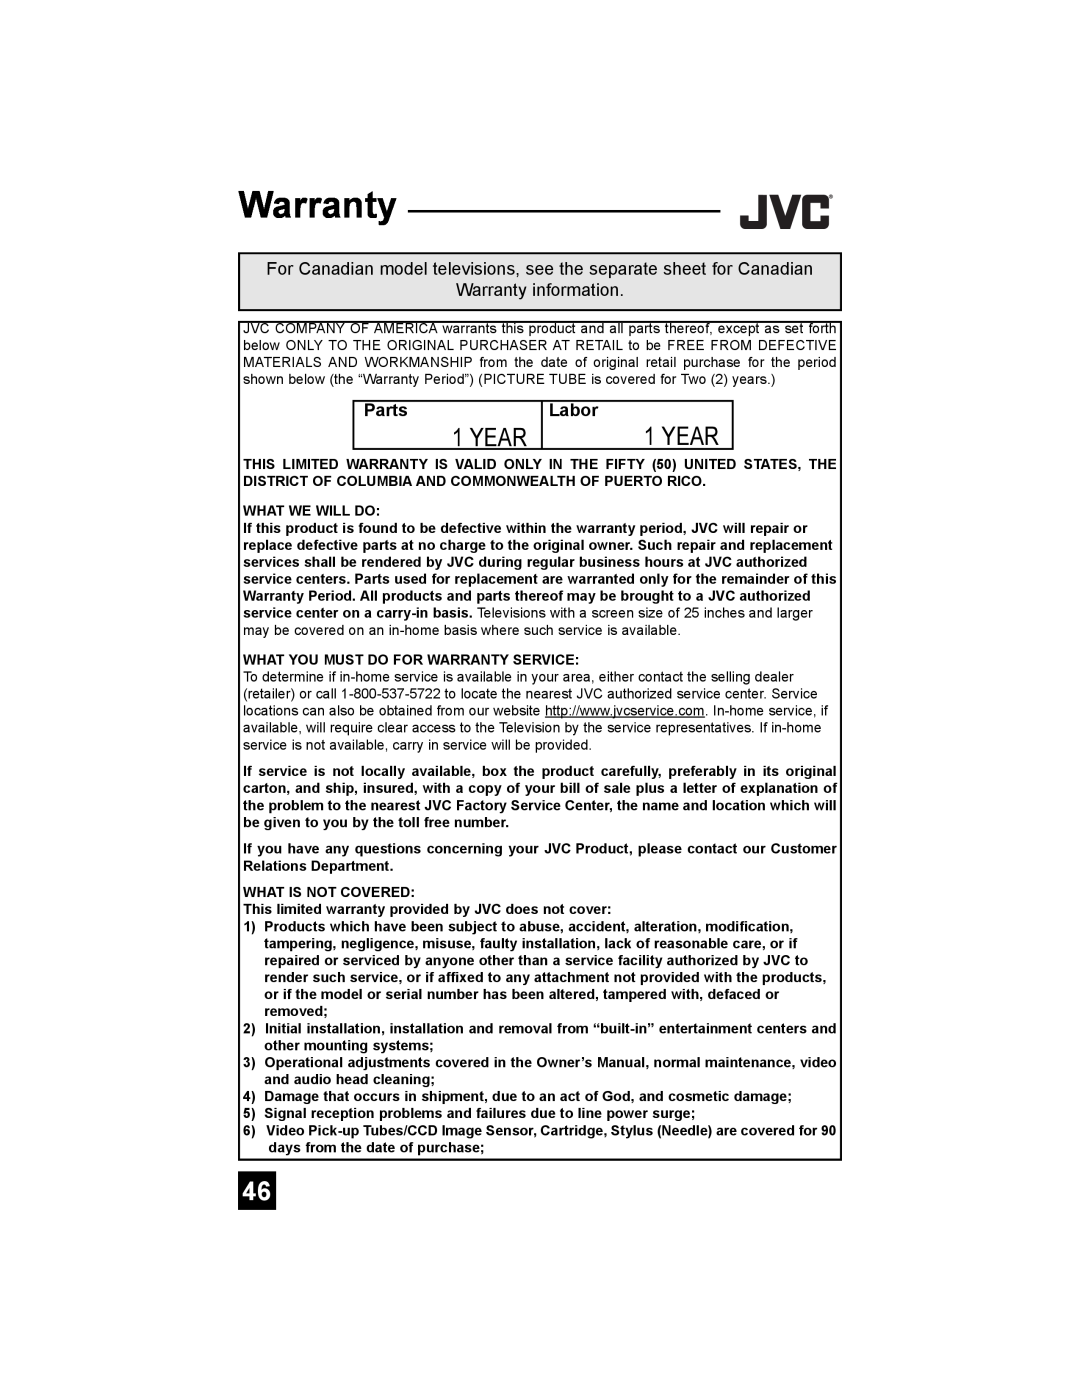 JVC AV 20FA44 For Canadian model televisions, see the separate sheet for Canadian, Warranty information, Parts, Labor 